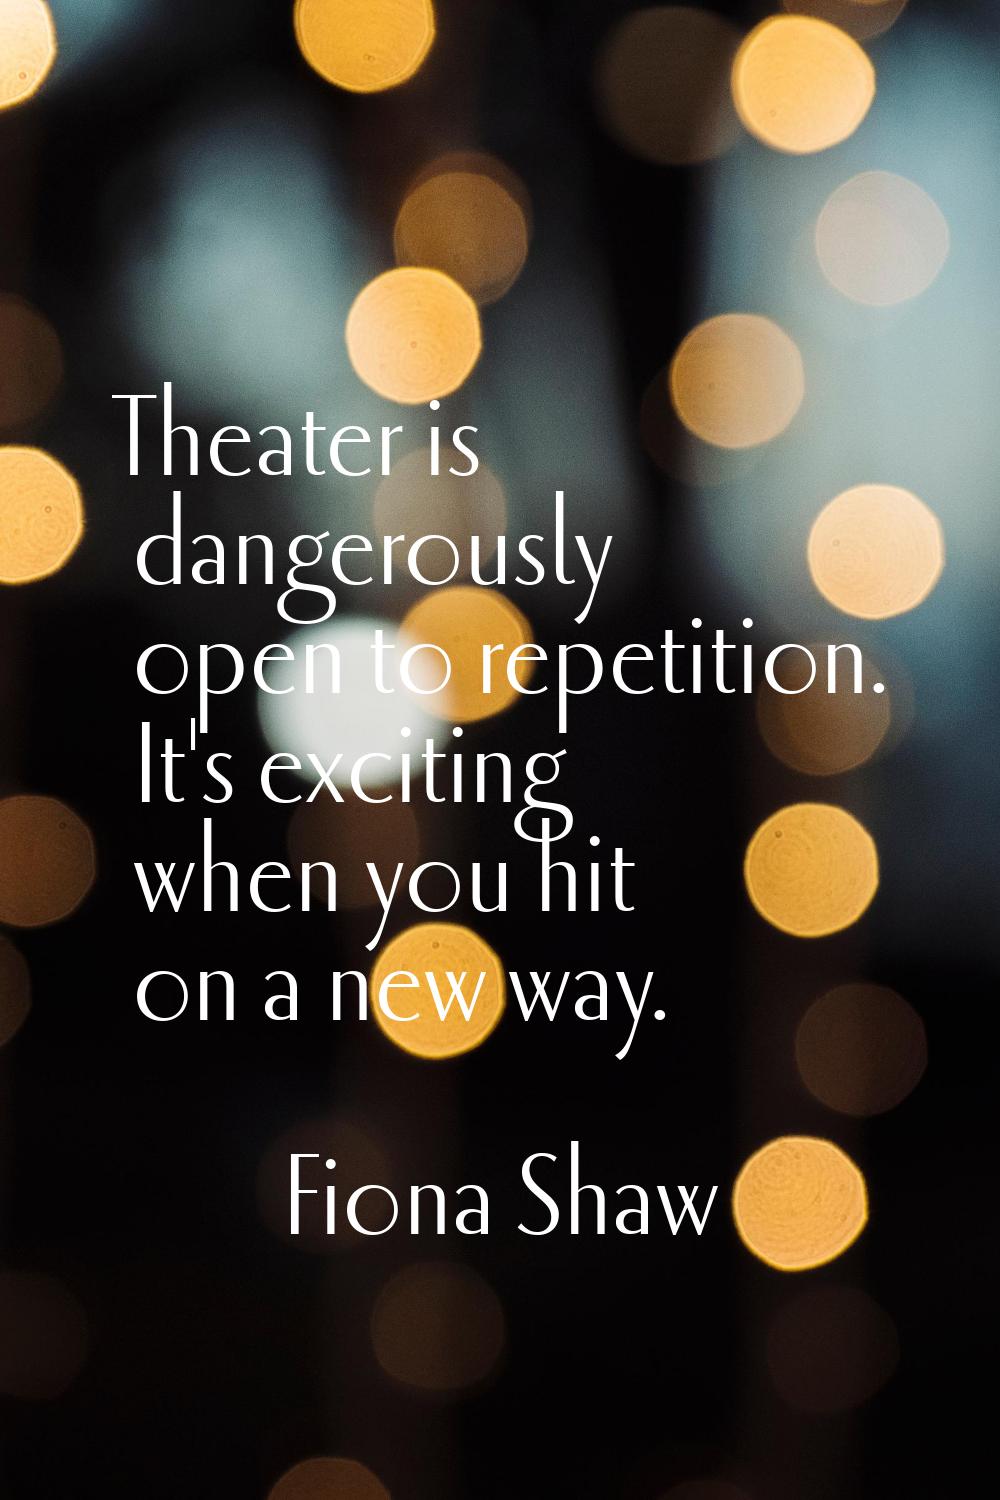 Theater is dangerously open to repetition. It's exciting when you hit on a new way.